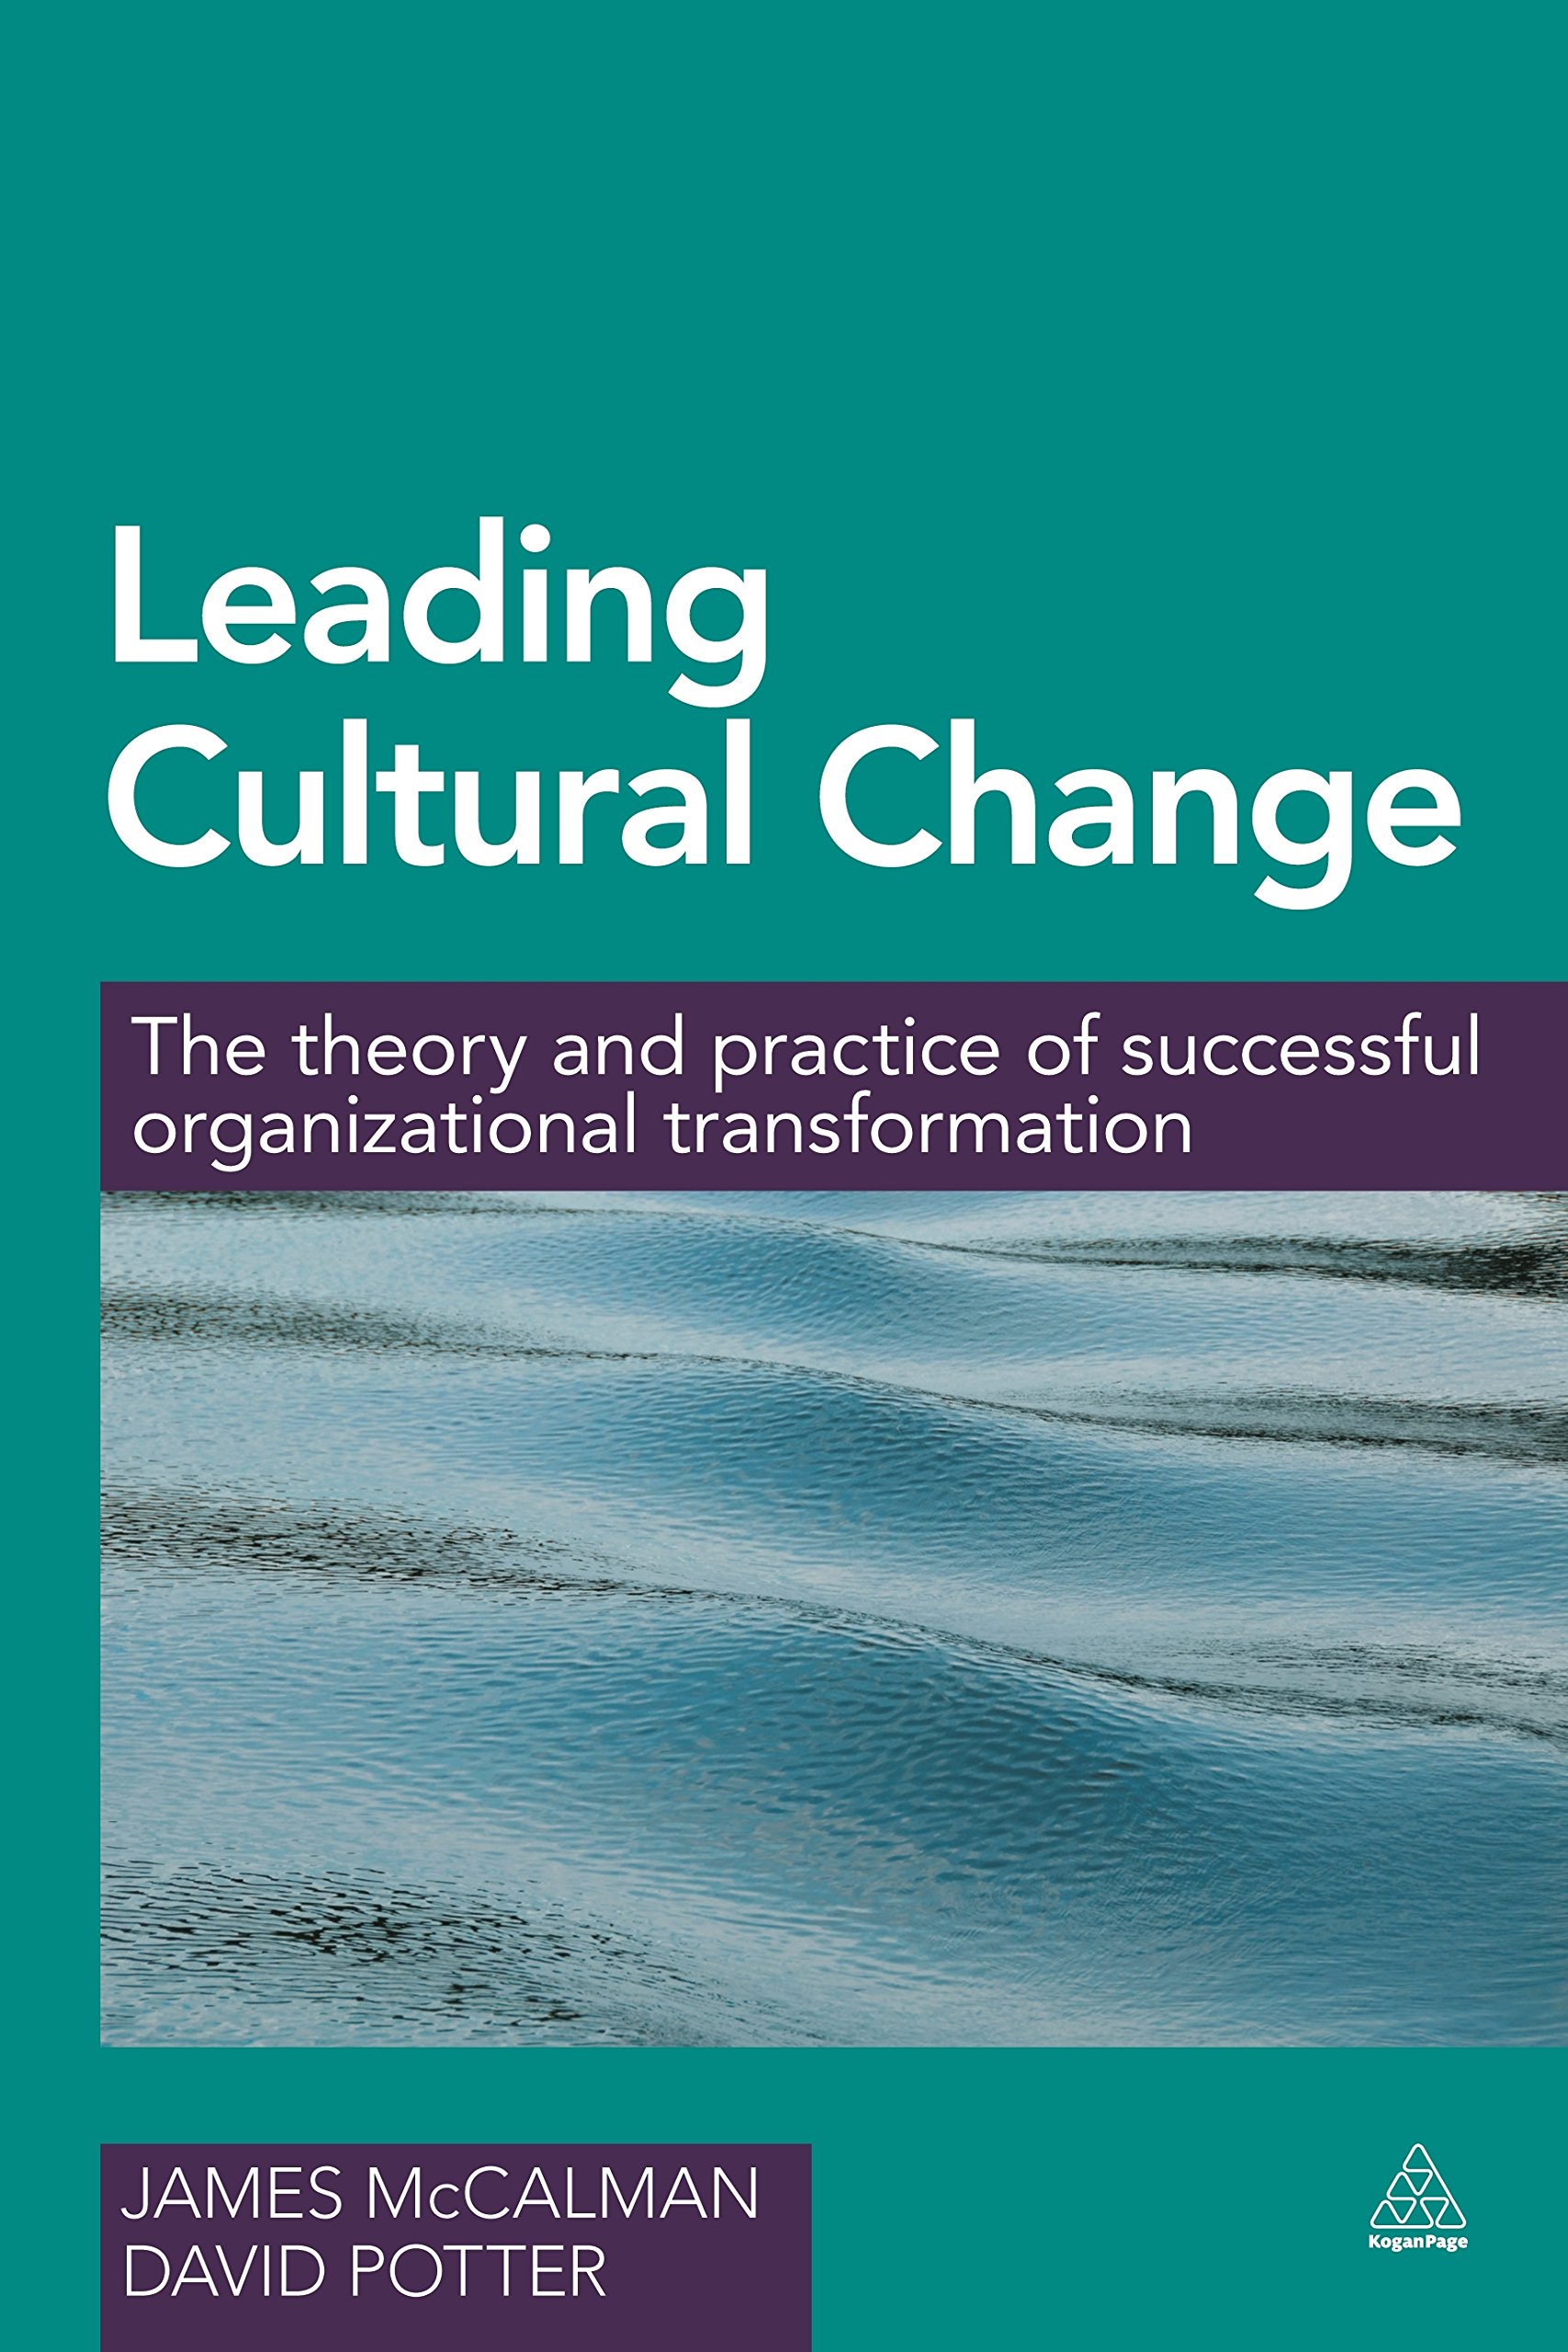 Leading Cultural Change: The Theory and Practice of Successful Organizational Transformation